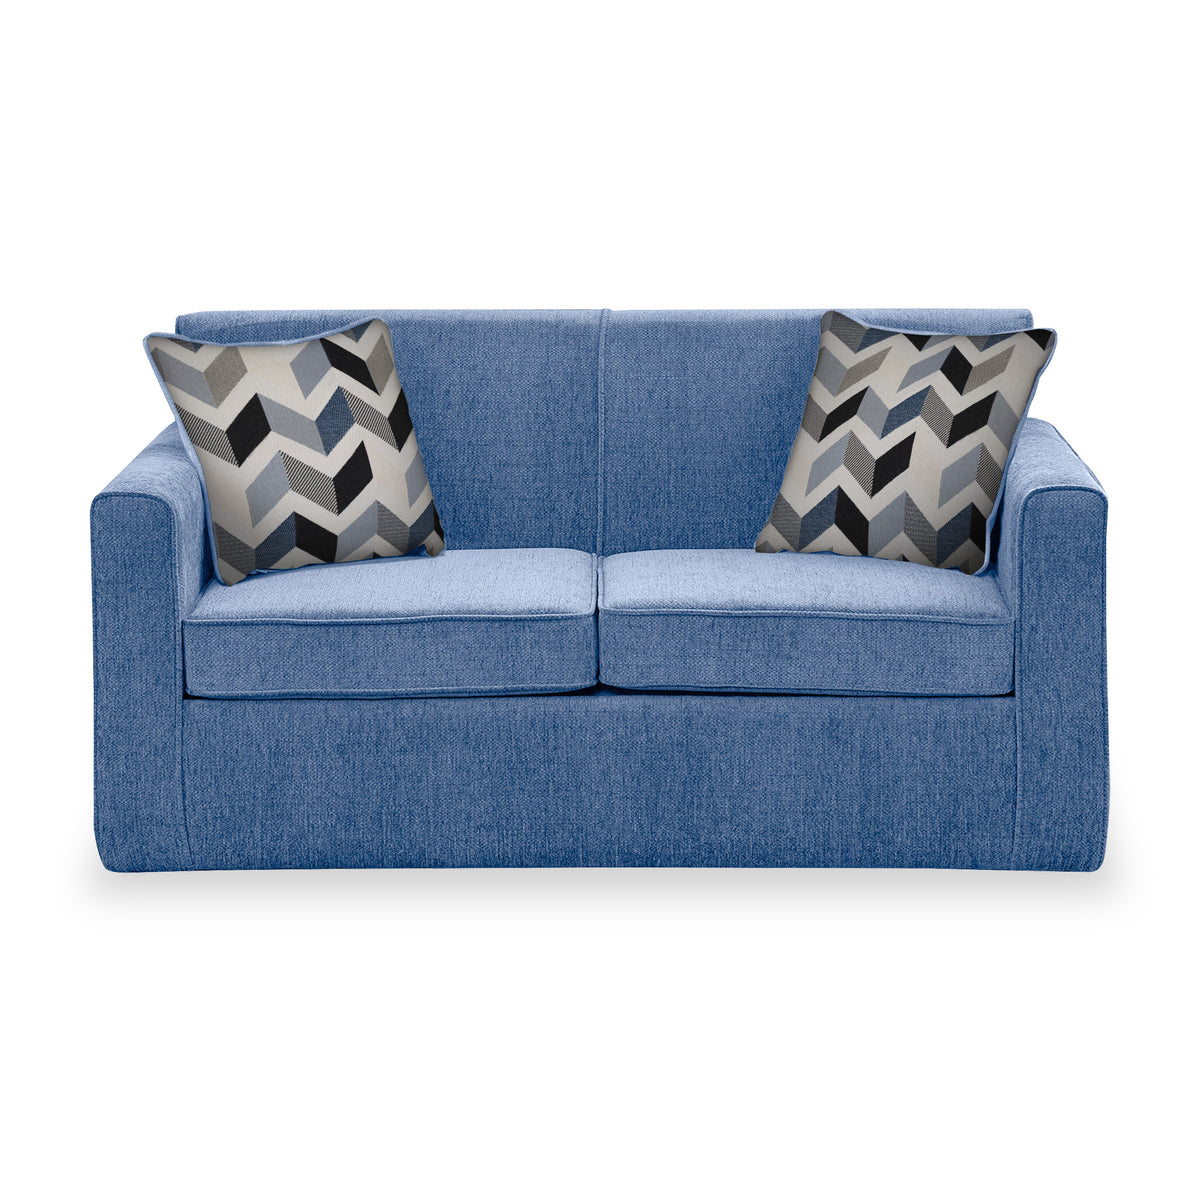 Bawtry Denim Faux Linen 2 Seater Sofabed with Denim Scatter Cushions from Roseland Furniture